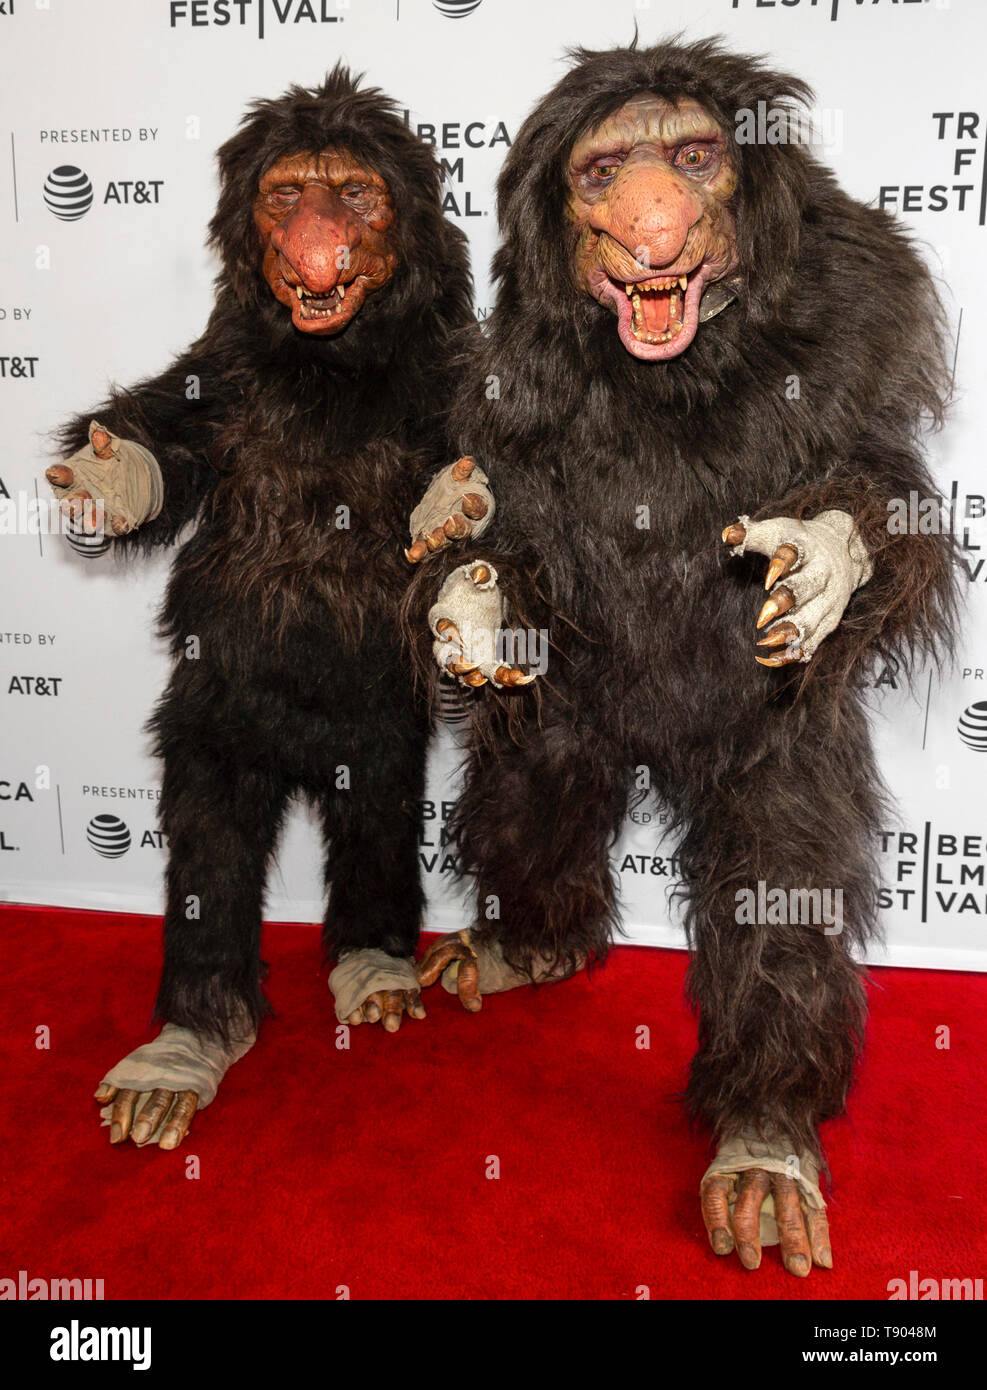 New York, NY - April 27, 2019: Grumblers - Boomer and Morse attend the premiere of the 'The Place of No Words' during the 2019 Tribeca Film Festival a Stock Photo